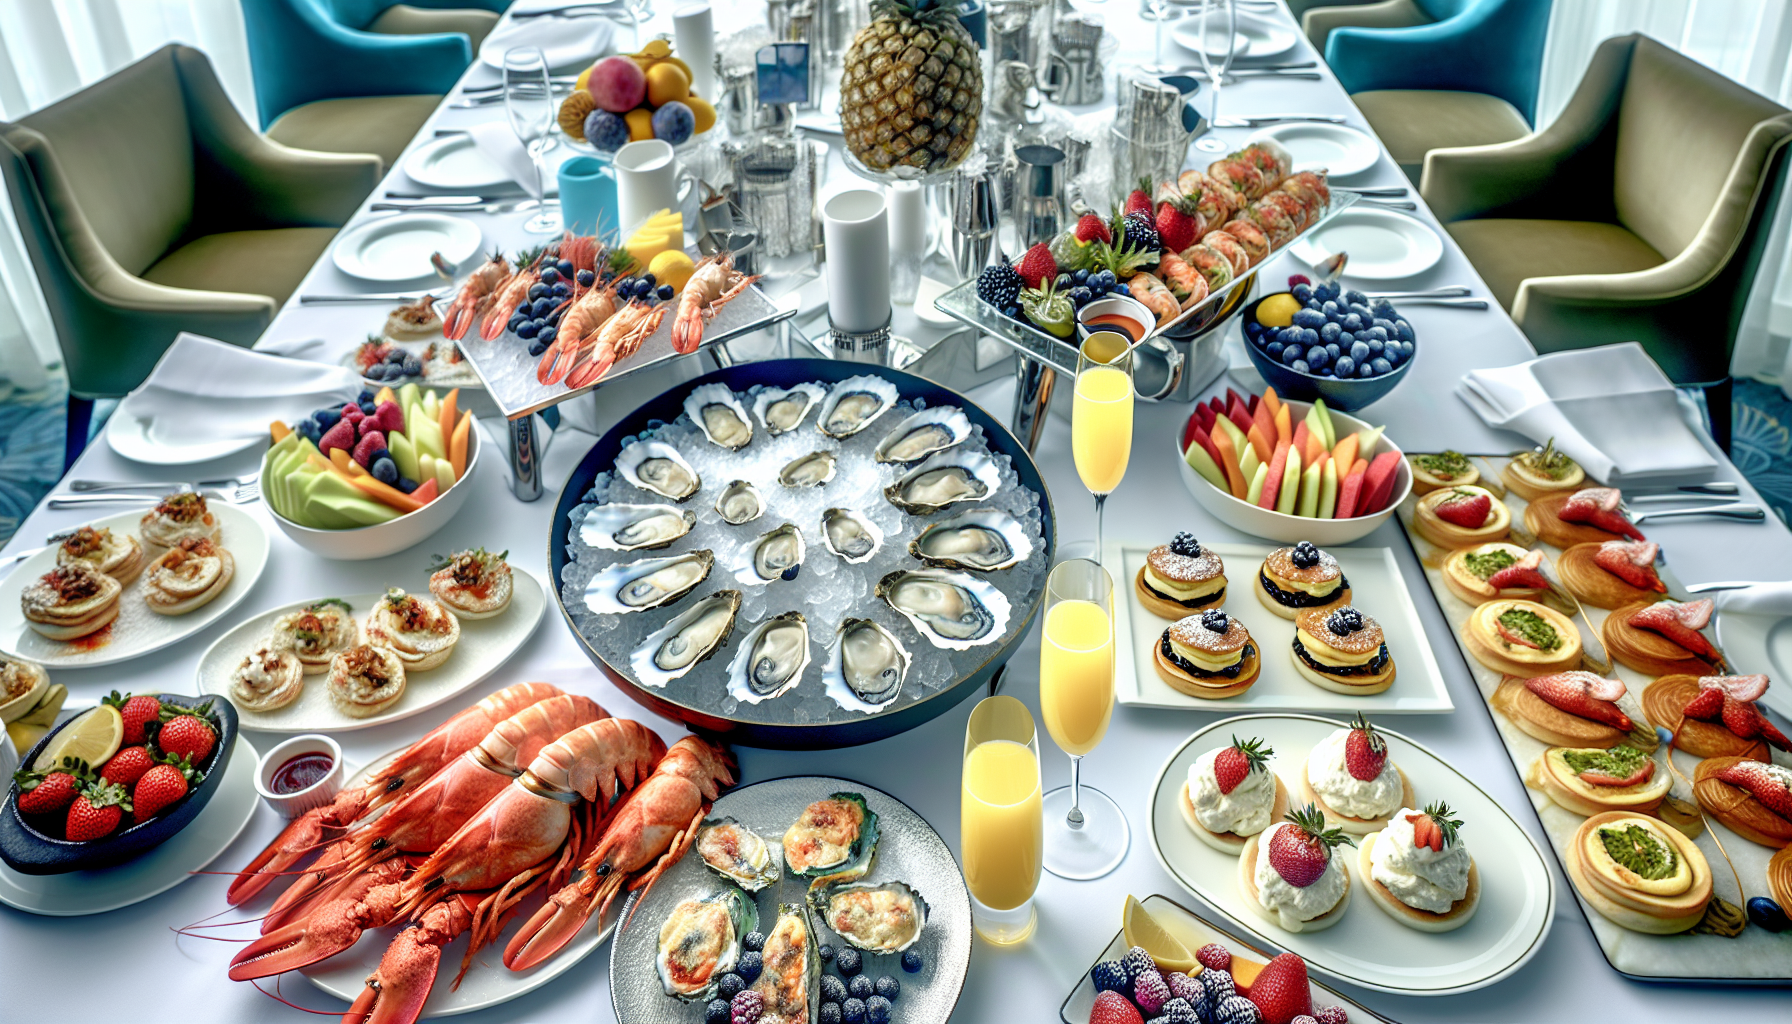 A delectable spread of fresh seafood and brunch delicacies